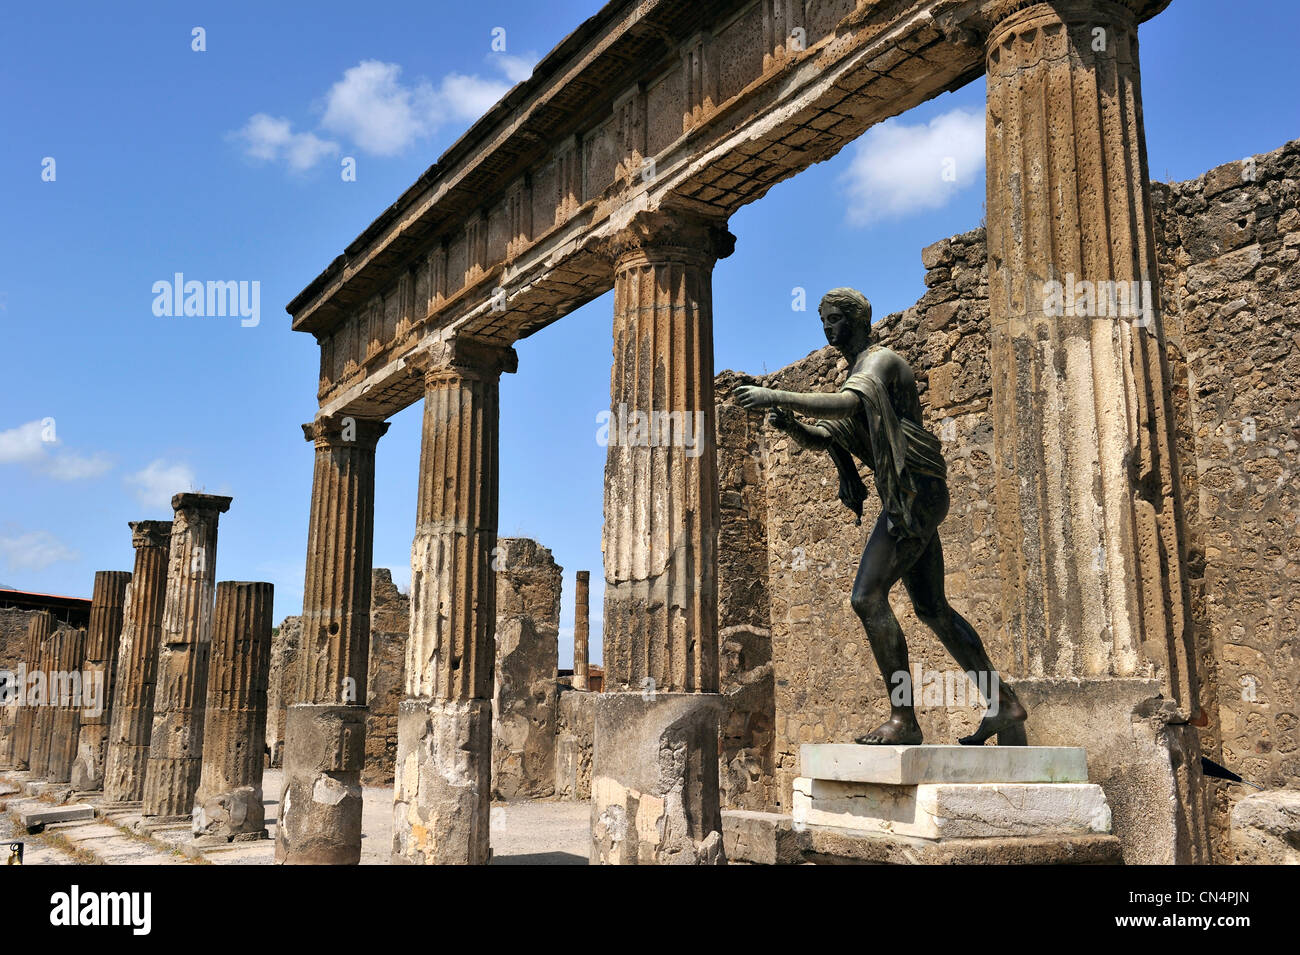 Italy, Campania, Pompei, archeological site listed as World Heritage by UNESCO, the Apollo temple Stock Photo